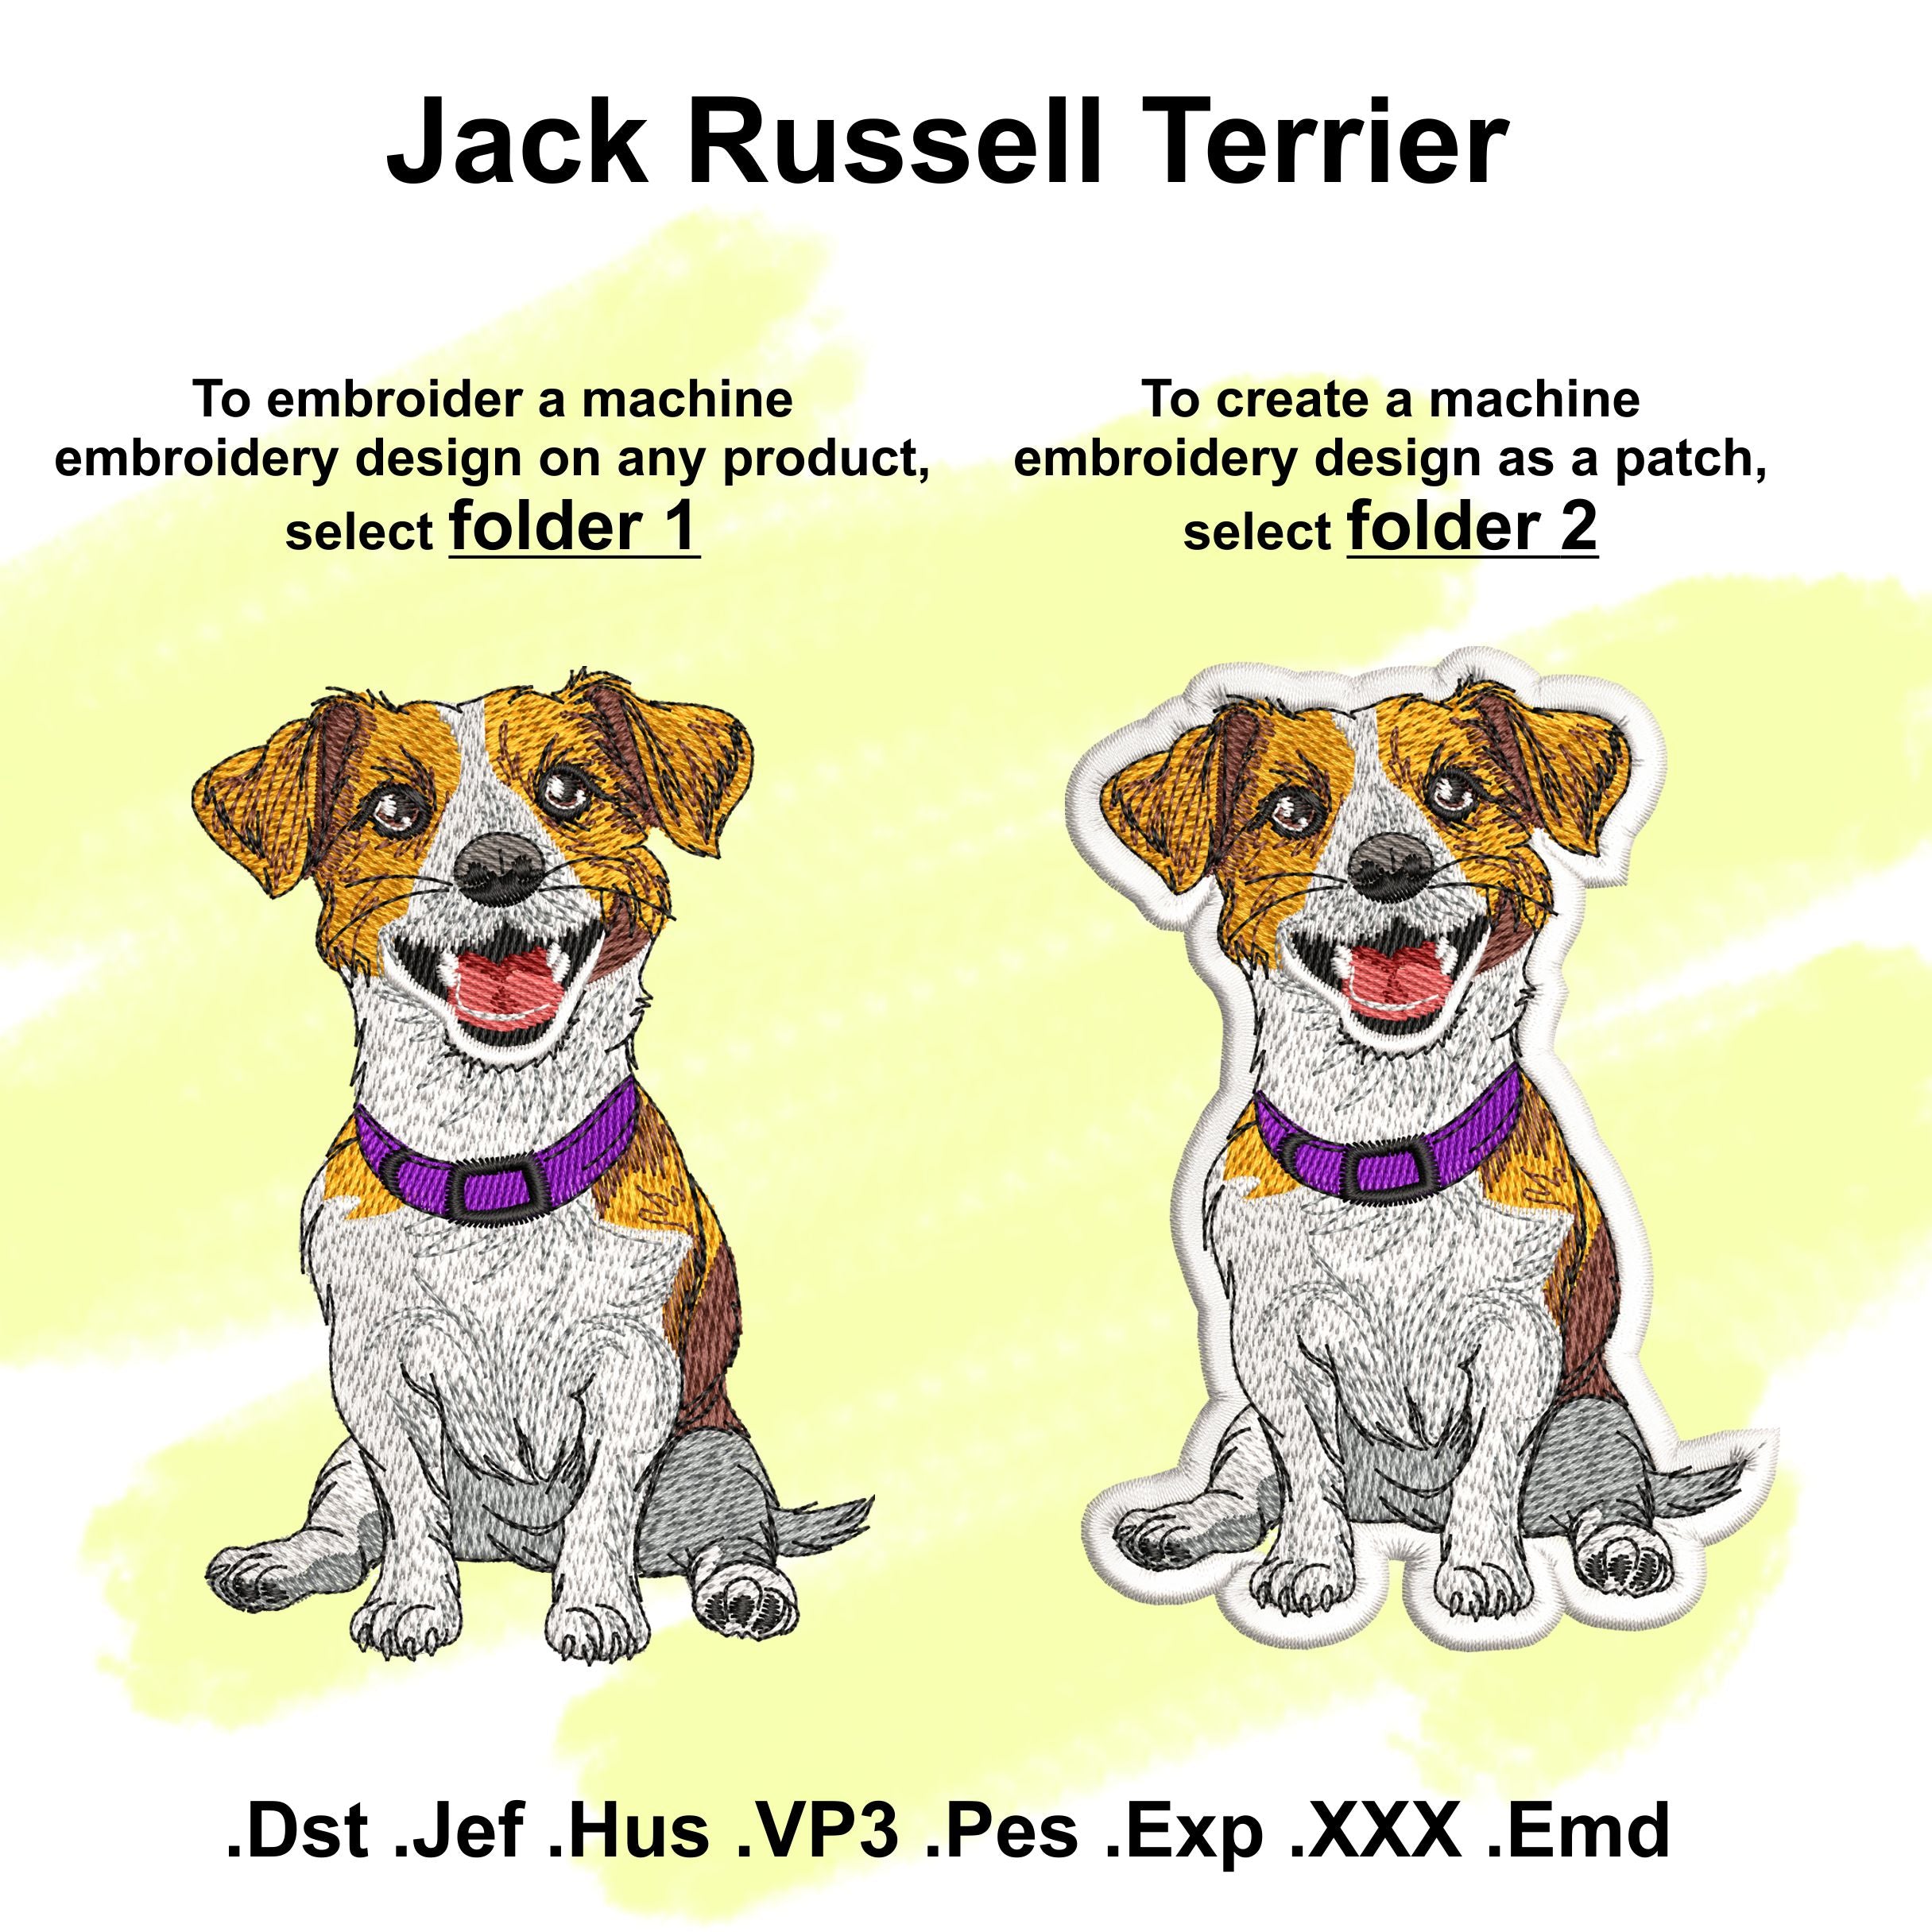 Jack Russell Terrier Embroidery Design for machine.